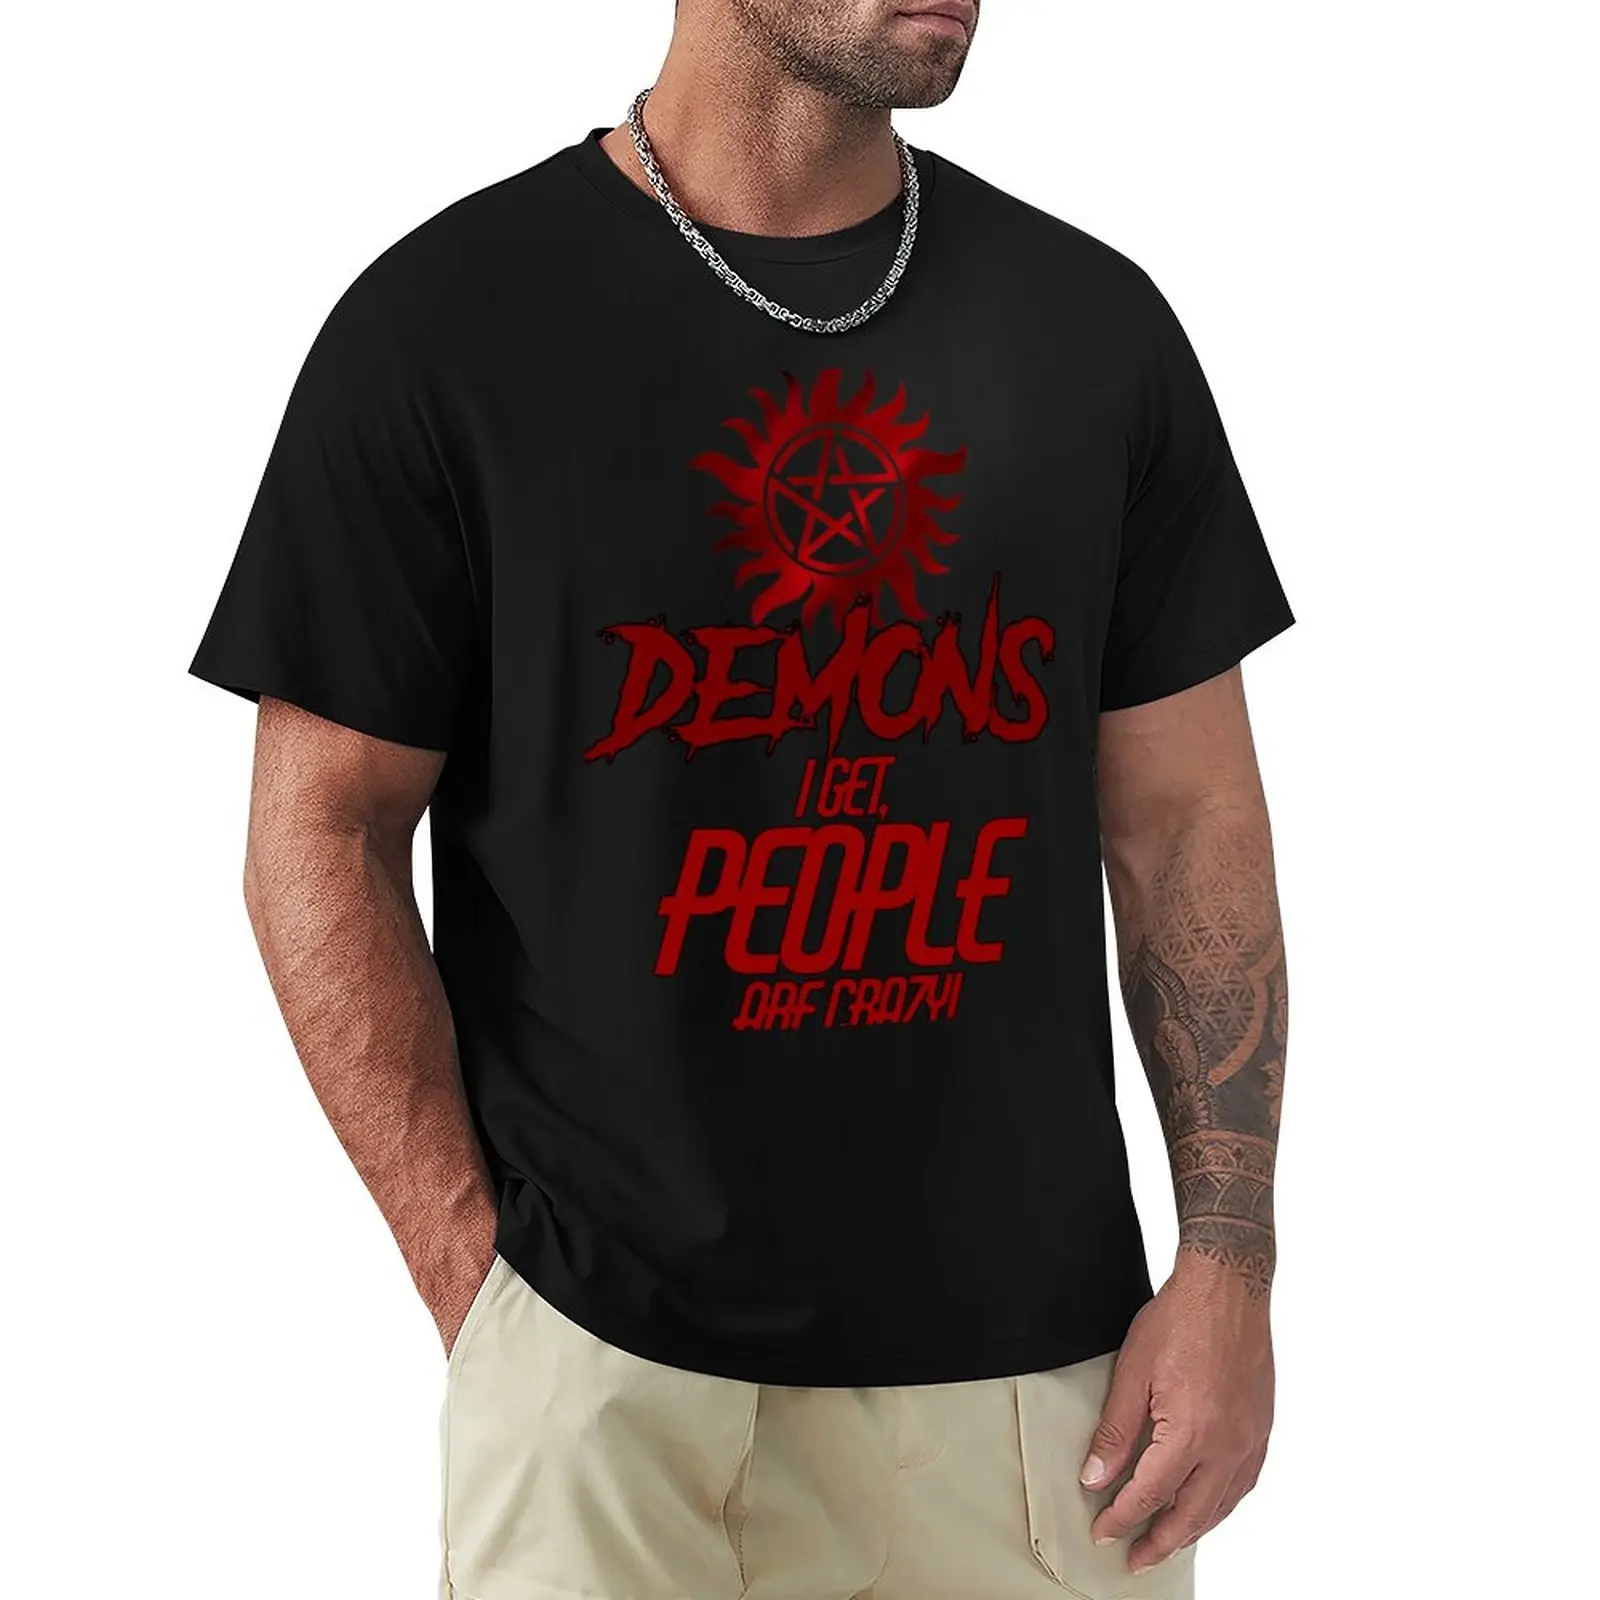 

Demons I get, people are crazy! T-Shirt summer top hippie clothes Men's t shirts